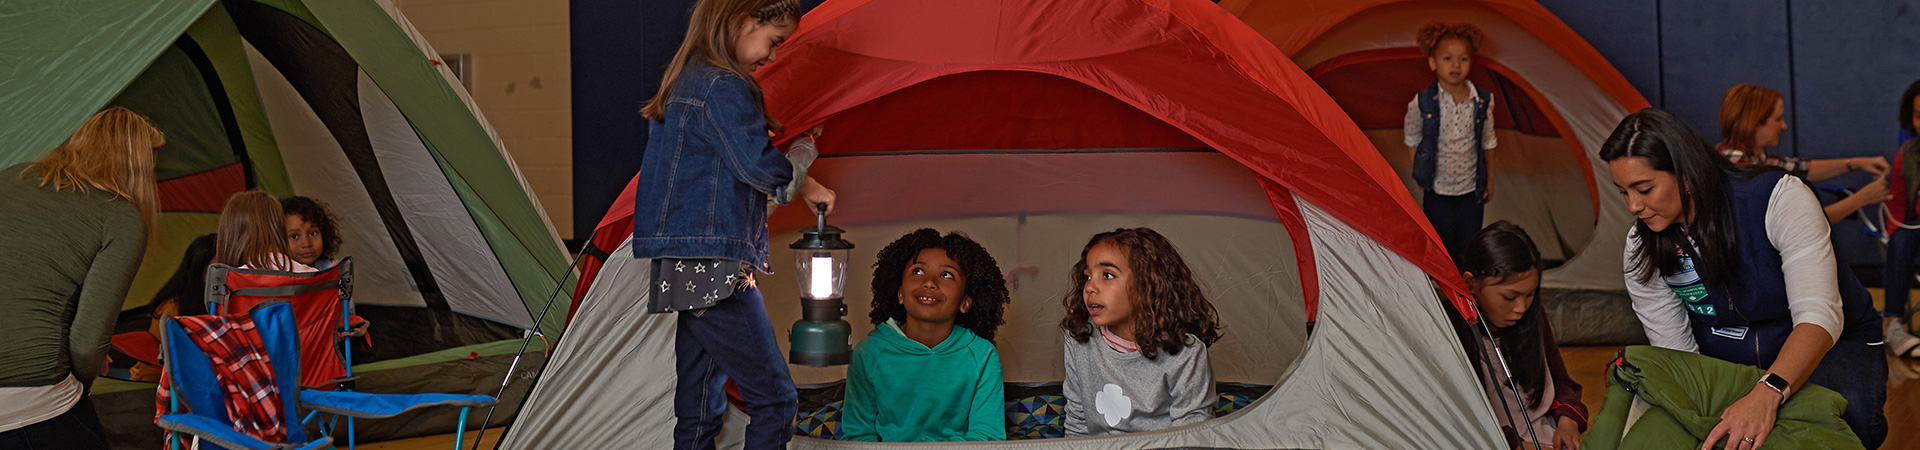  Two daisy Girl Scouts holding lantern in tent wearing trefoil shirt 